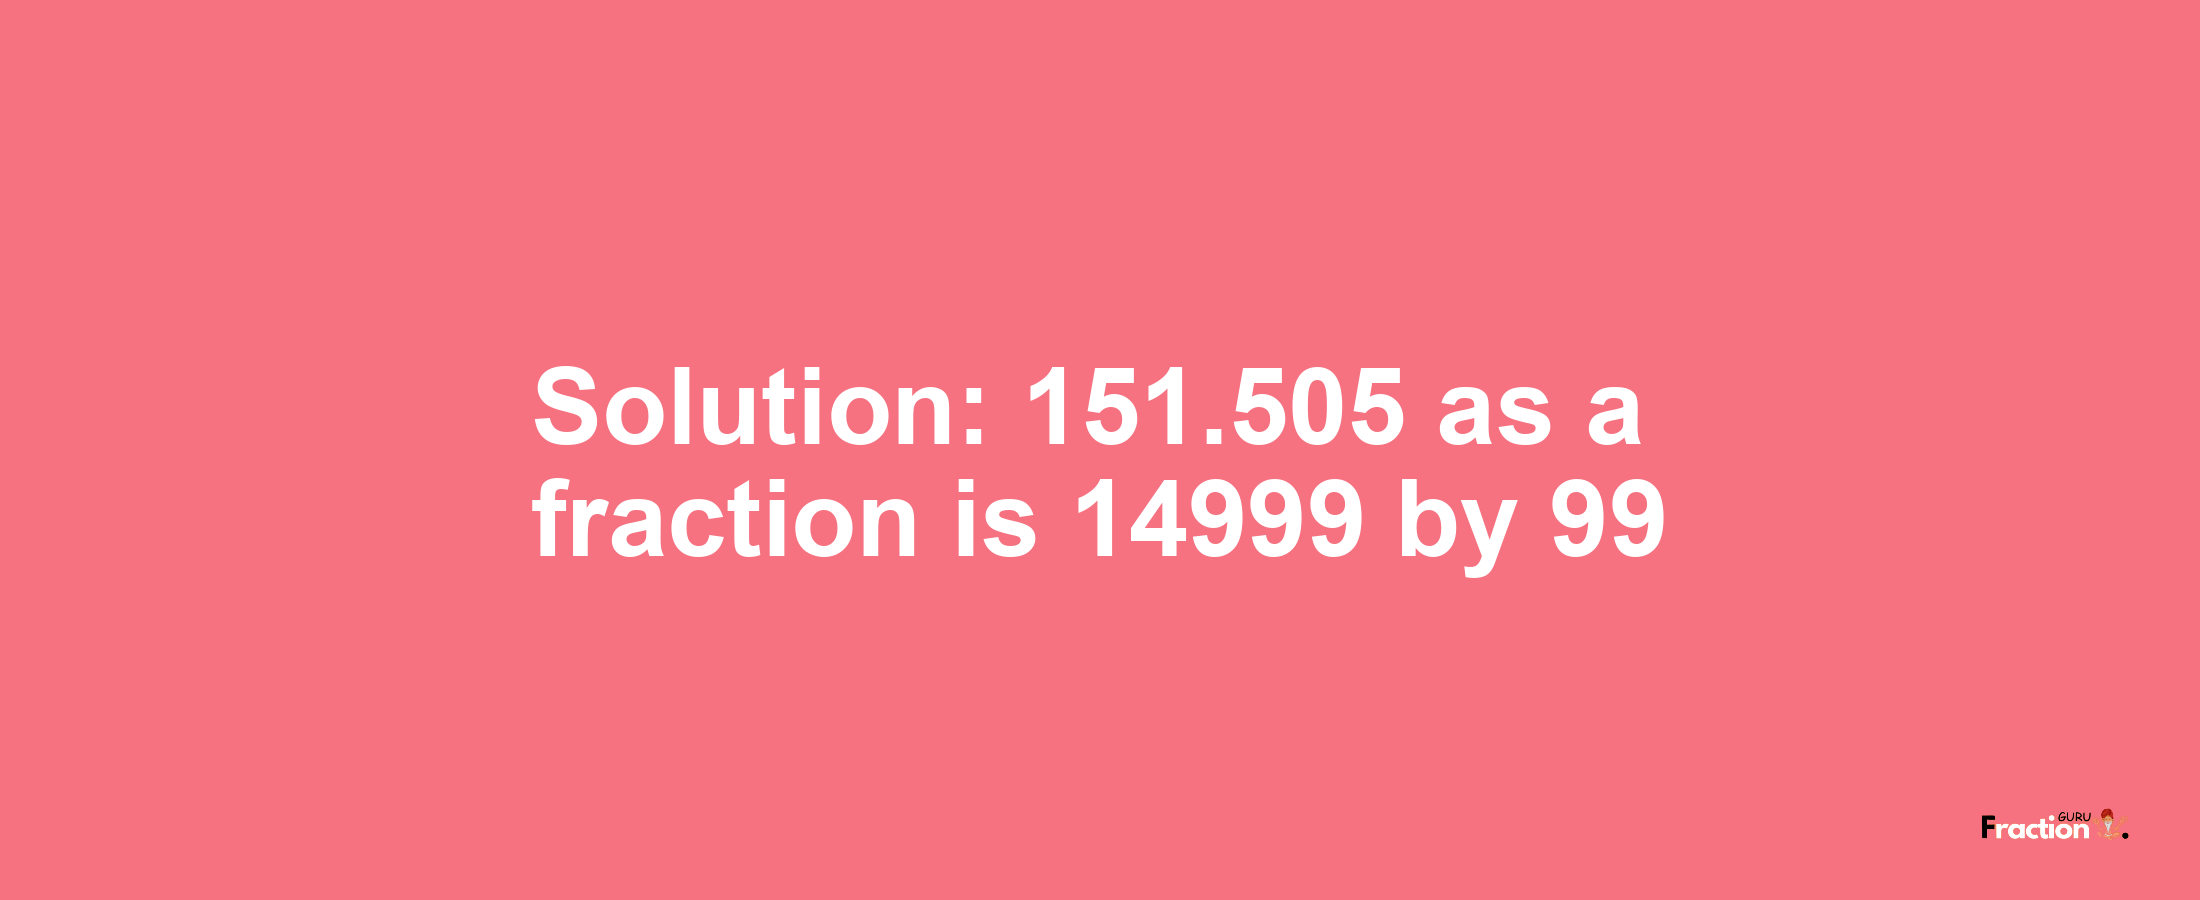 Solution:151.505 as a fraction is 14999/99